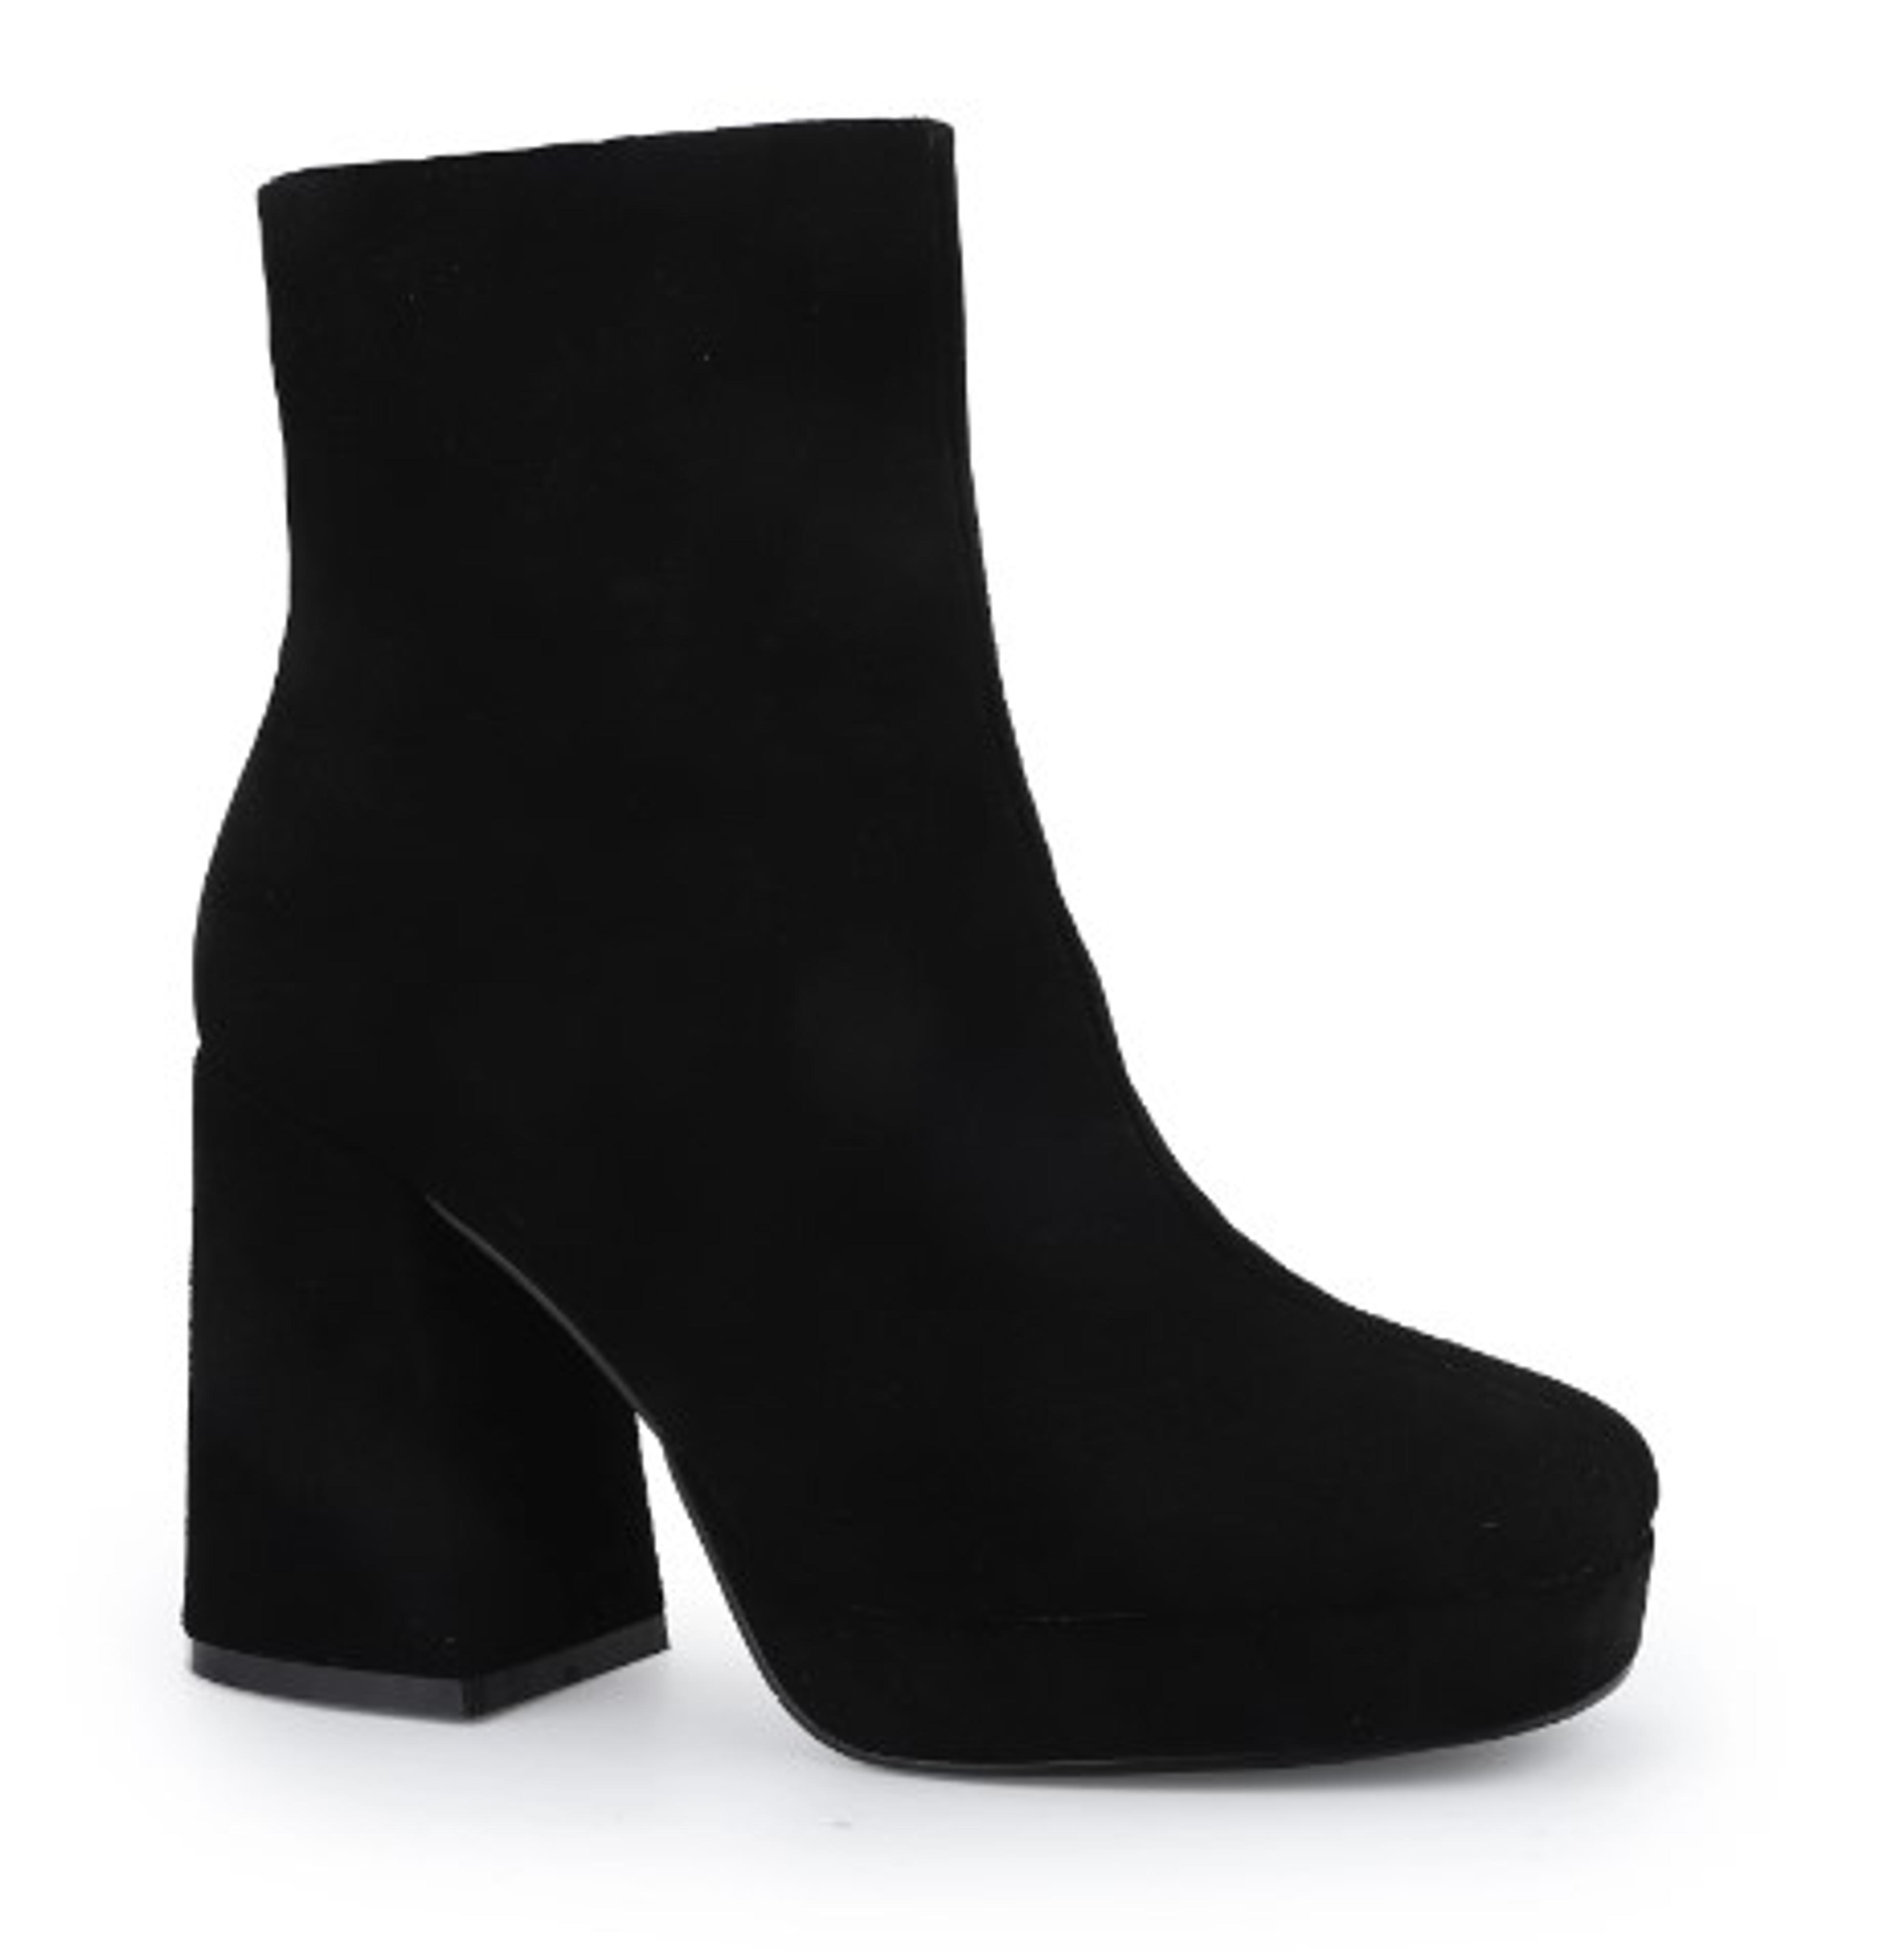  Bayside Ankle Bootie